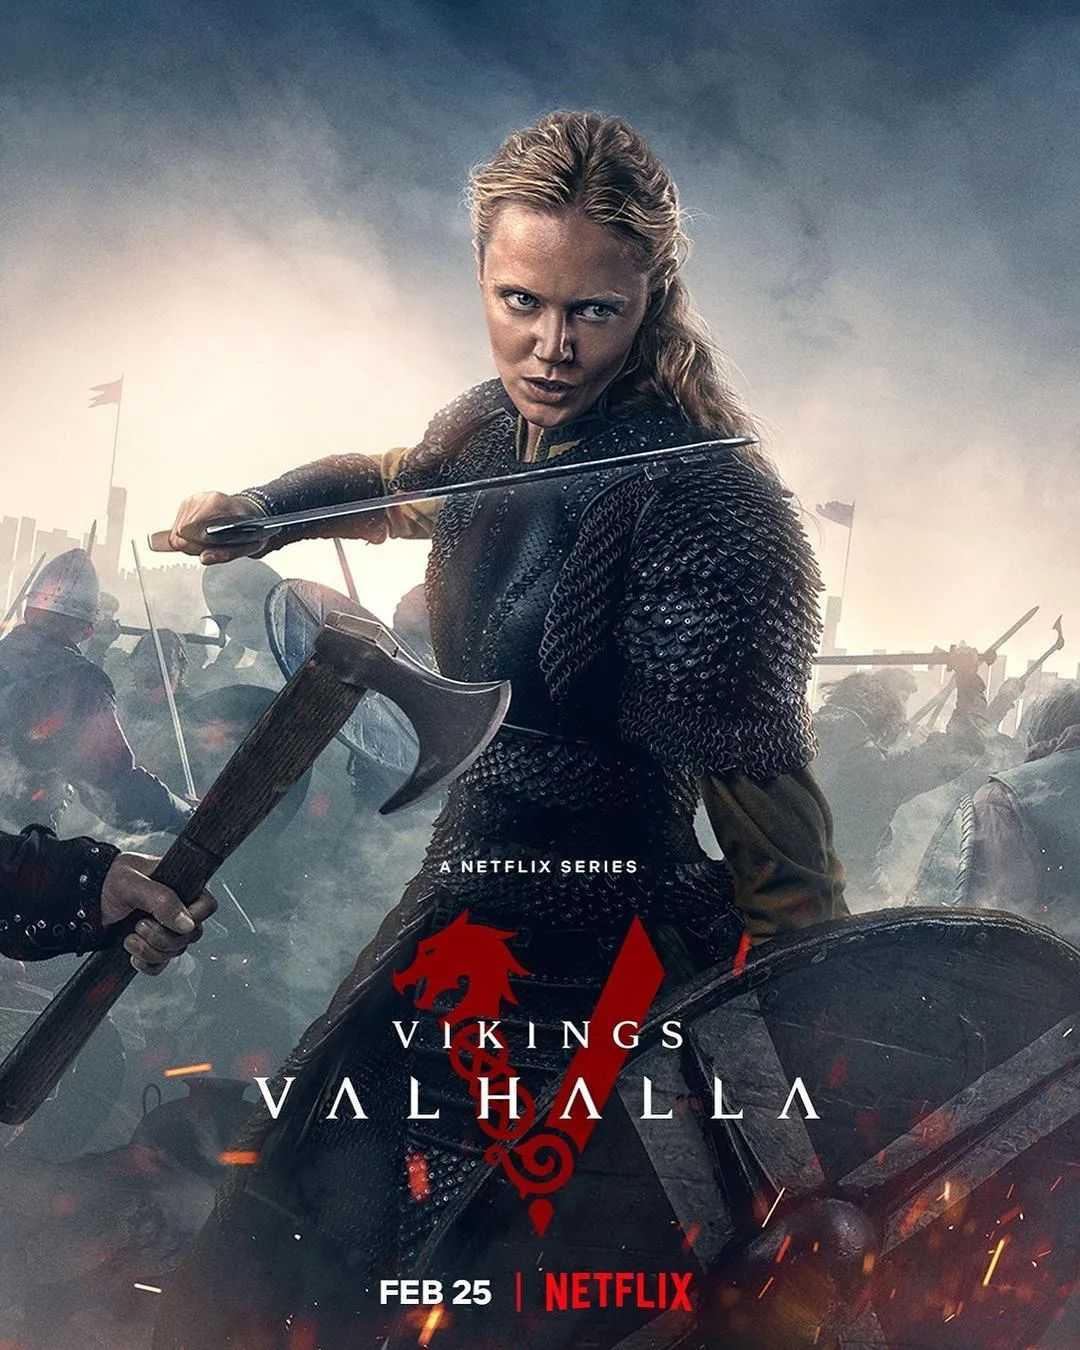 Featured picture for the movie; Vikings Valhalla S1 EP4 - ROCKY